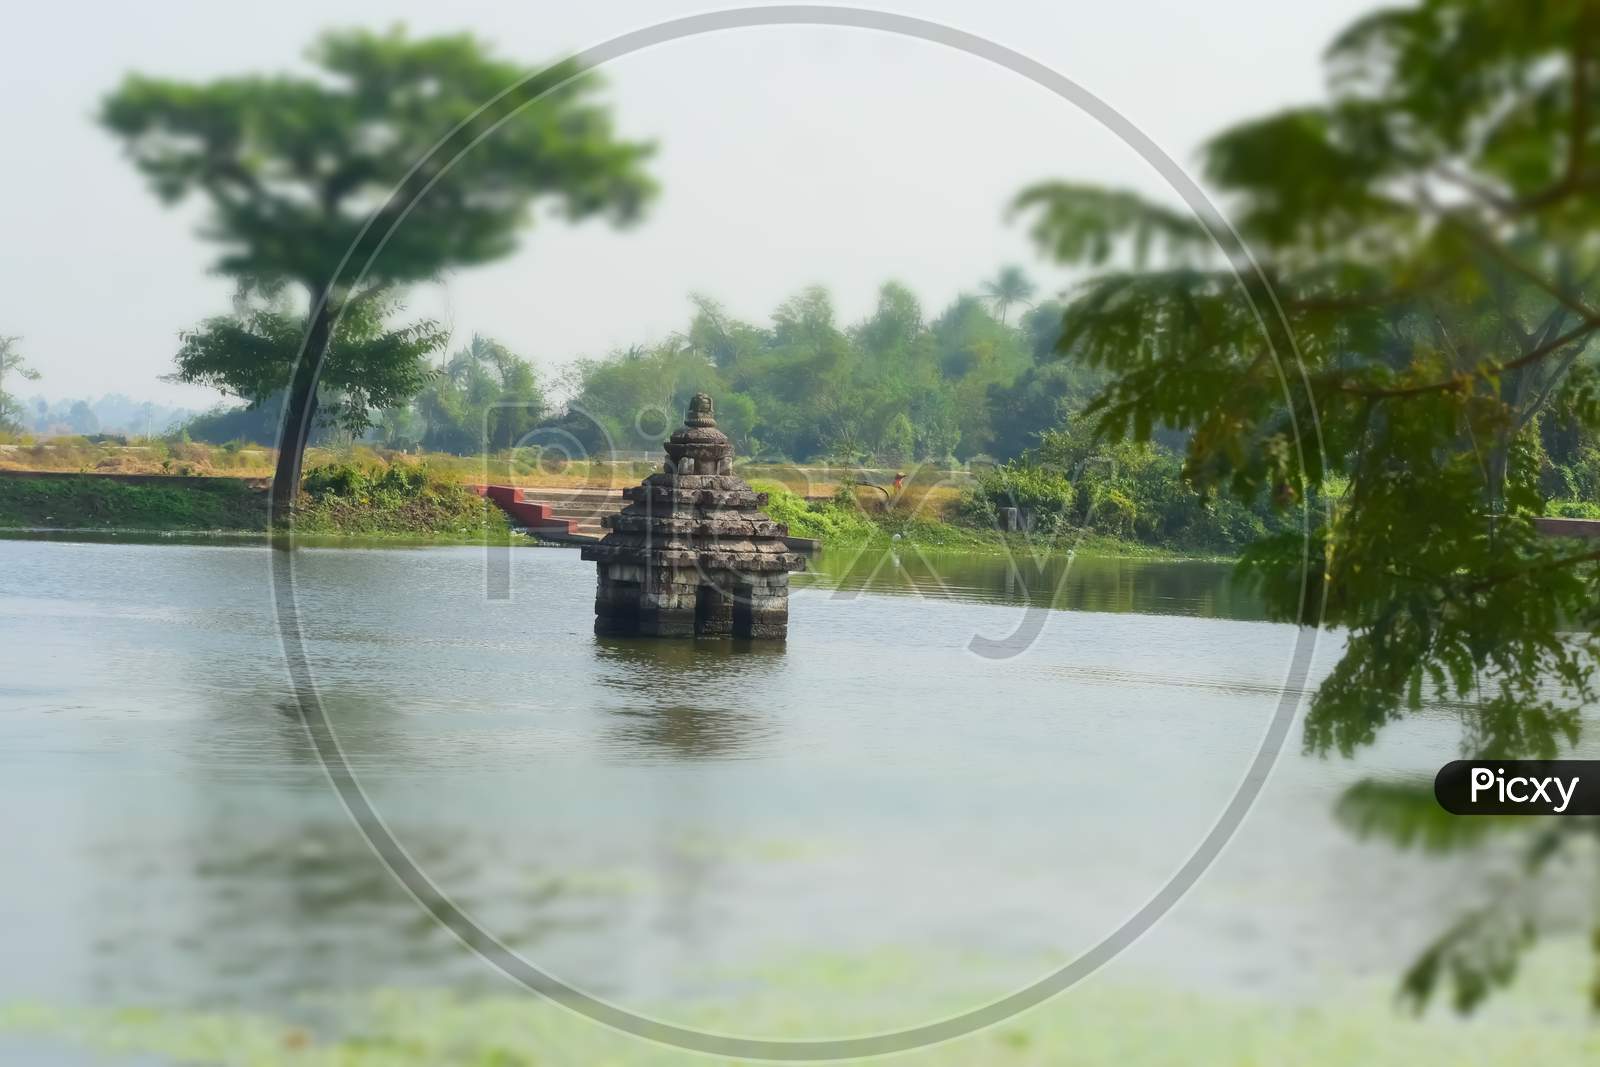 Religious Small temple surrounded by water.